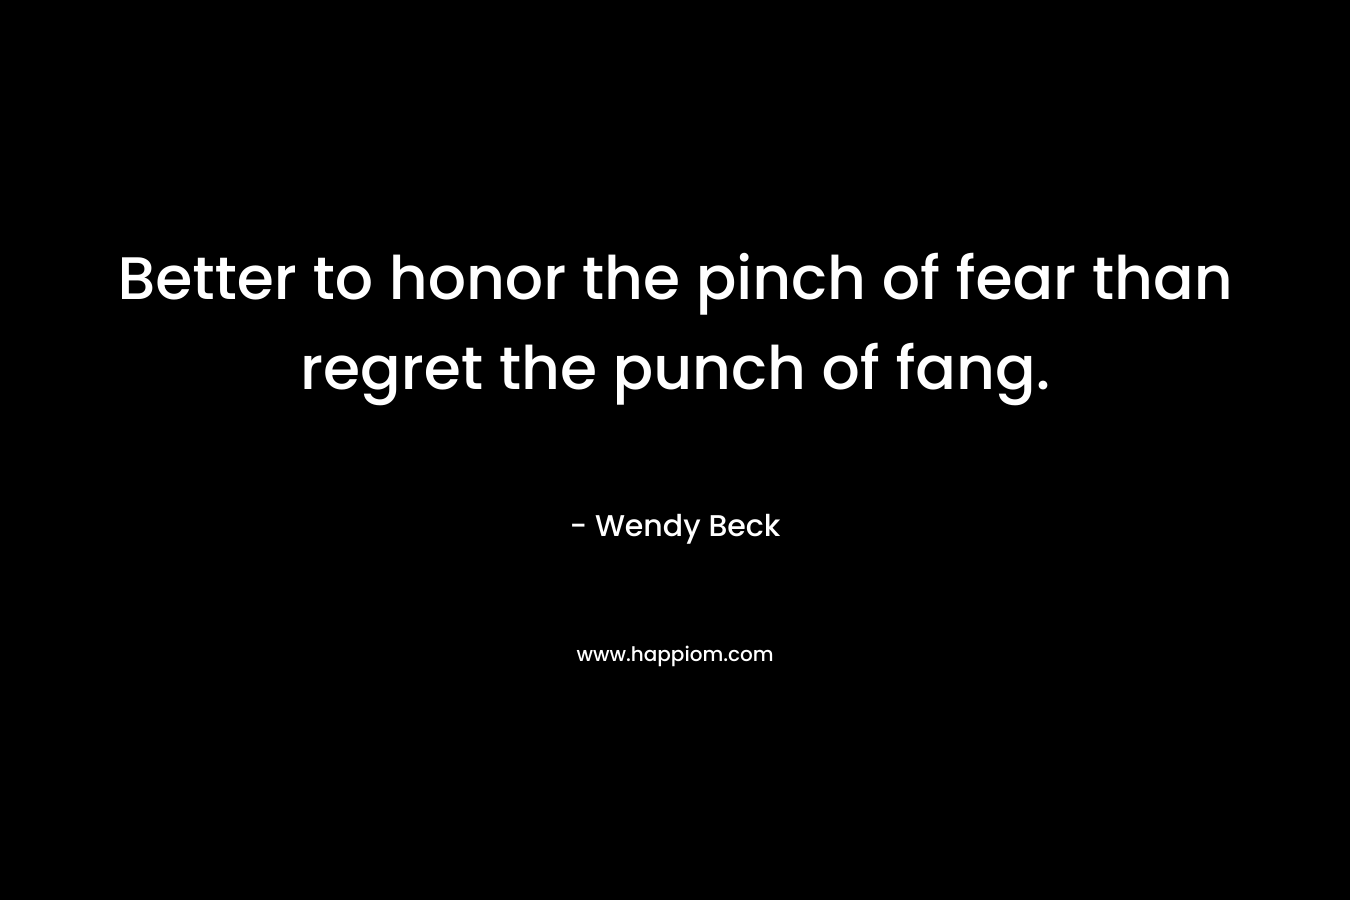 Better to honor the pinch of fear than regret the punch of fang. – Wendy Beck